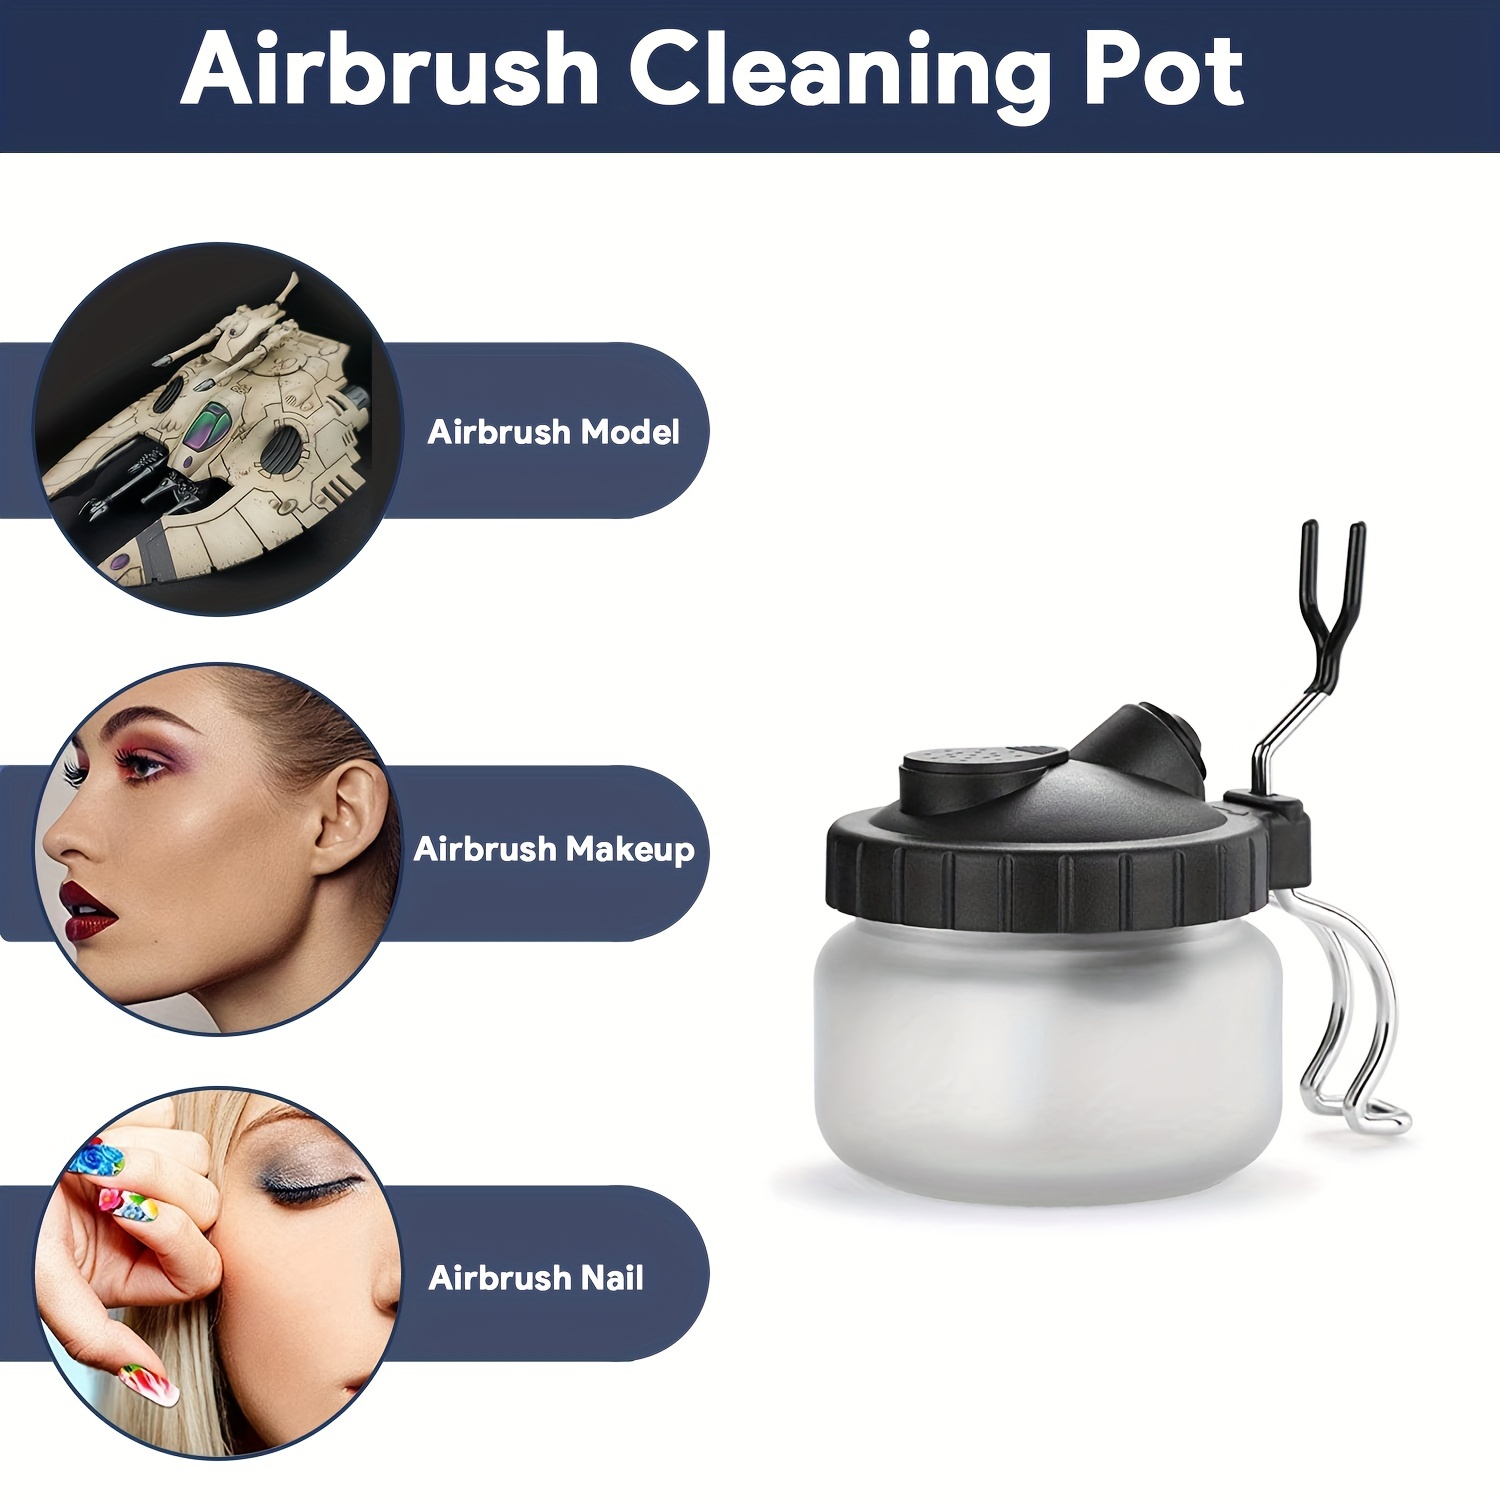 Airbrush Cleaning Kit,Airbrush Cleaner Tools, Glass Cleaning Pot Jar